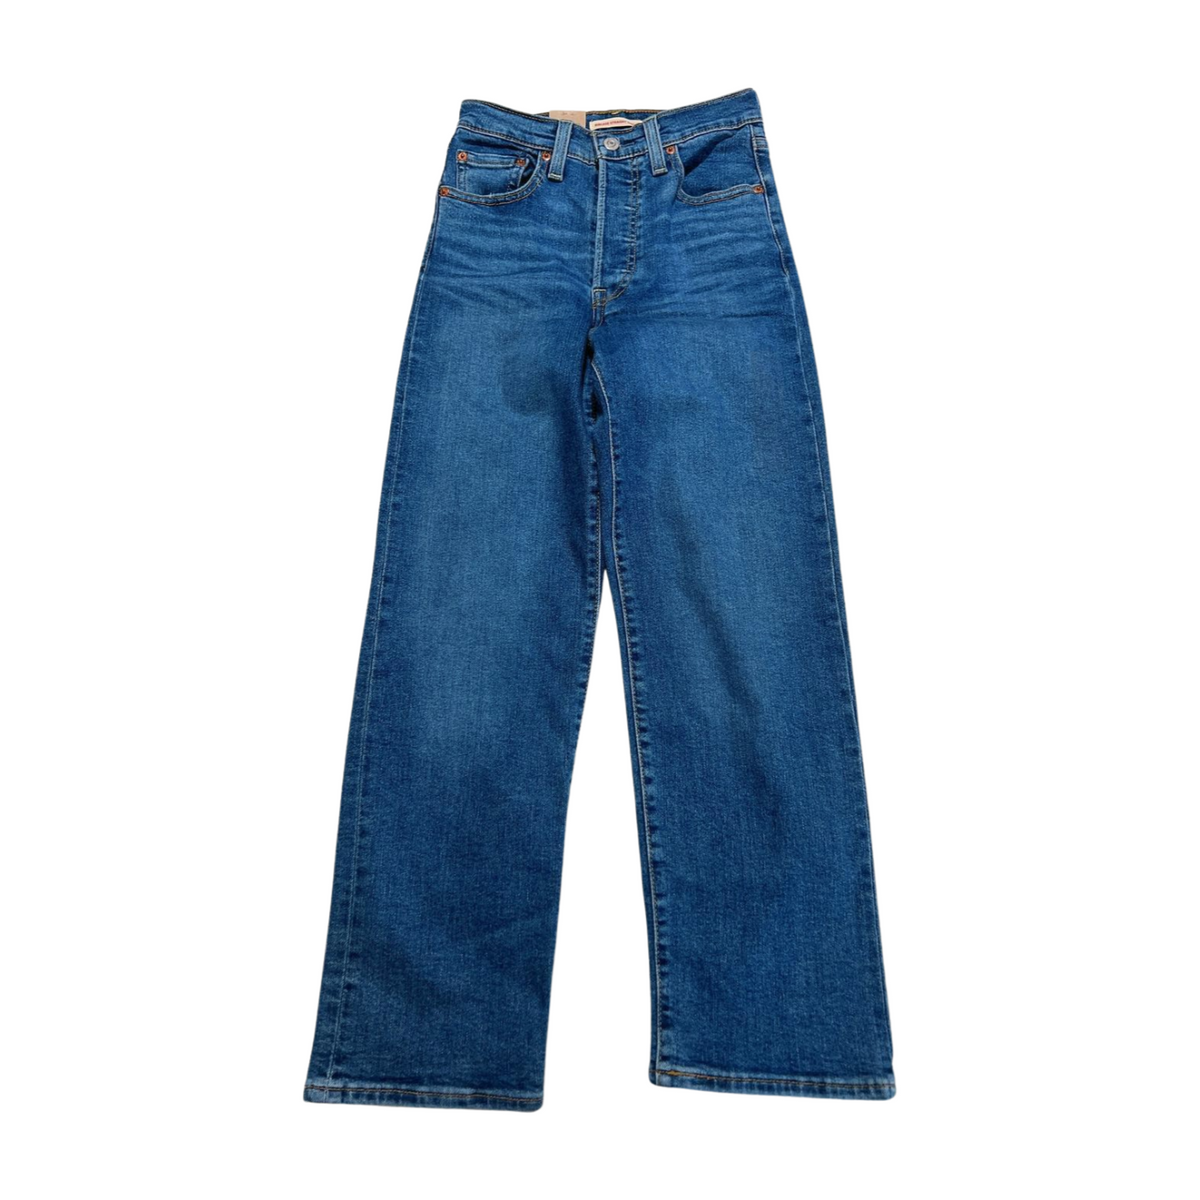 Levis- "Ribcage Straight Ankle" Jeans NEW WITH TAGS!